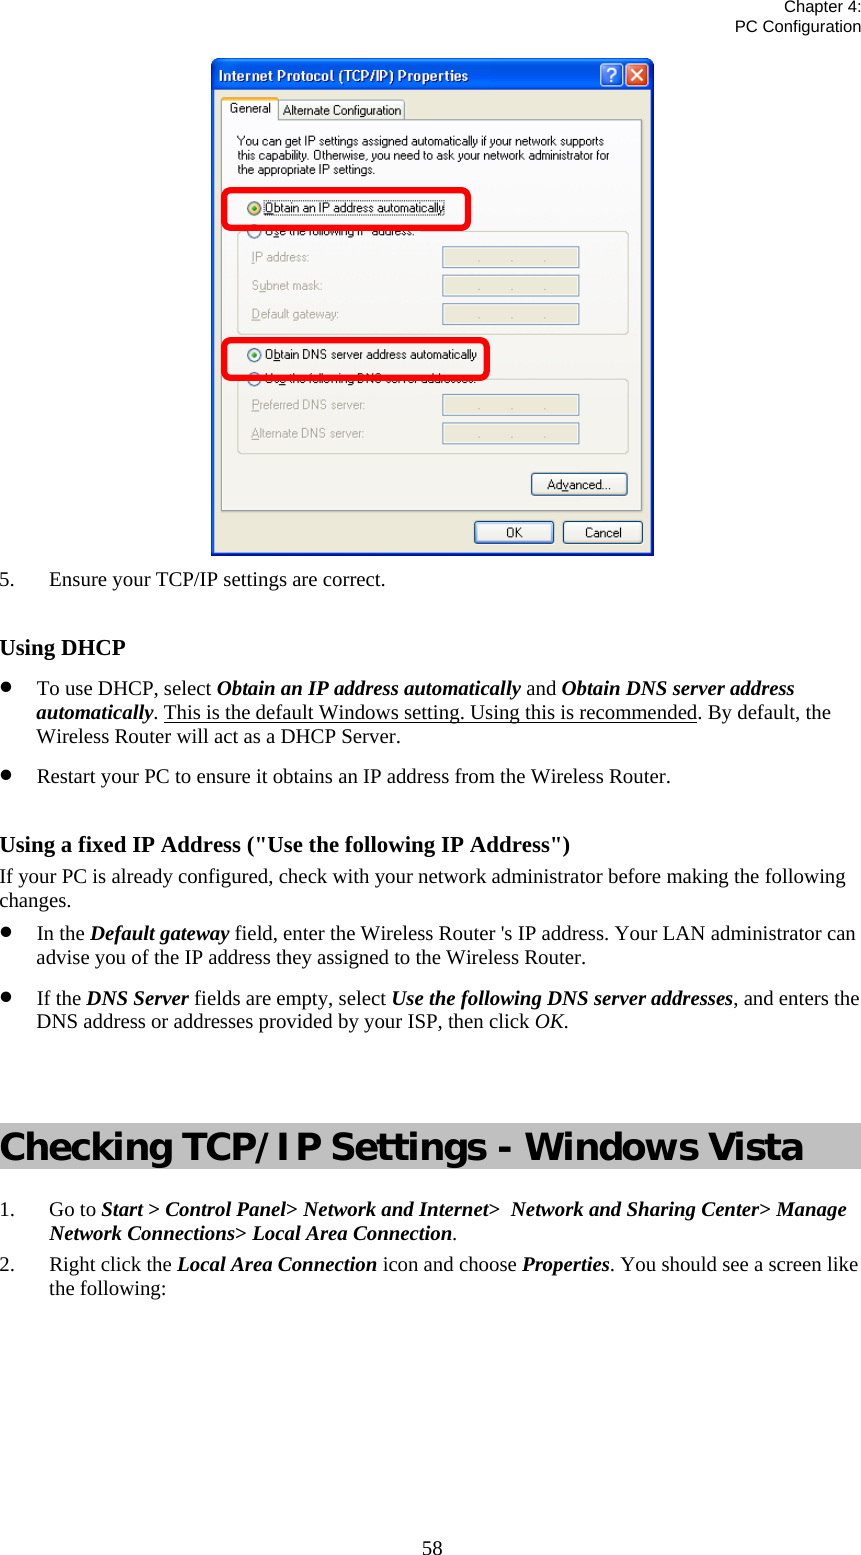   Chapter 4:  PC Configuration  58 5. Ensure your TCP/IP settings are correct.  Using DHCP • To use DHCP, select Obtain an IP address automatically and Obtain DNS server address automatically. This is the default Windows setting. Using this is recommended. By default, the Wireless Router will act as a DHCP Server. • Restart your PC to ensure it obtains an IP address from the Wireless Router.  Using a fixed IP Address (&quot;Use the following IP Address&quot;) If your PC is already configured, check with your network administrator before making the following changes. • In the Default gateway field, enter the Wireless Router &apos;s IP address. Your LAN administrator can advise you of the IP address they assigned to the Wireless Router. • If the DNS Server fields are empty, select Use the following DNS server addresses, and enters the DNS address or addresses provided by your ISP, then click OK.   Checking TCP/IP Settings - Windows Vista 1. Go to Start &gt; Control Panel&gt; Network and Internet&gt;  Network and Sharing Center&gt; Manage Network Connections&gt; Local Area Connection. 2. Right click the Local Area Connection icon and choose Properties. You should see a screen like the following: 